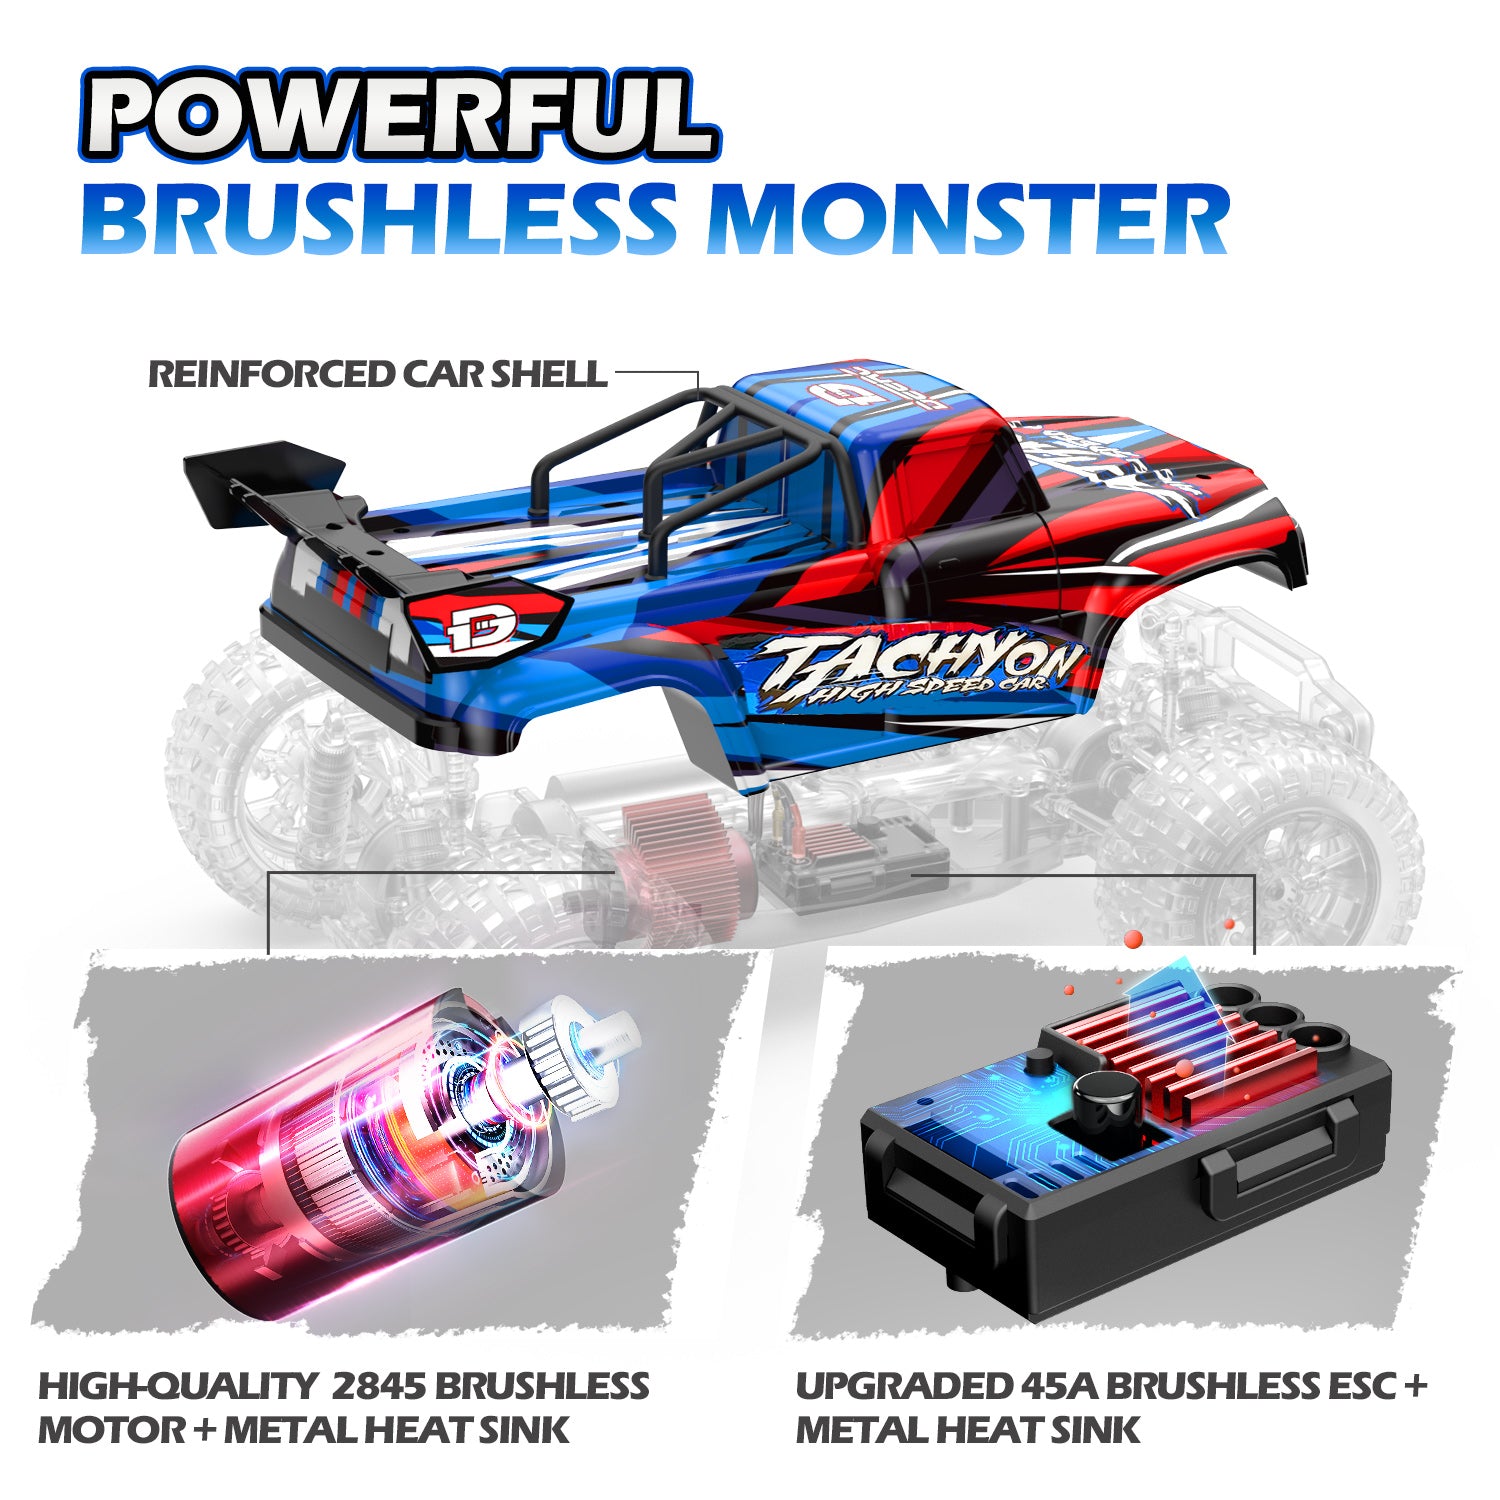 DEERC 1:10 Scale Fast Brushless RC Car for Adults, 4WD High Speed RC Monster Truck, 60+ KMH, All Terrain 2.4Ghz Hobby RC Truck, Off-Road Remote Control Vehicle, 40+ min Play, RC Crawler Gift for Boys